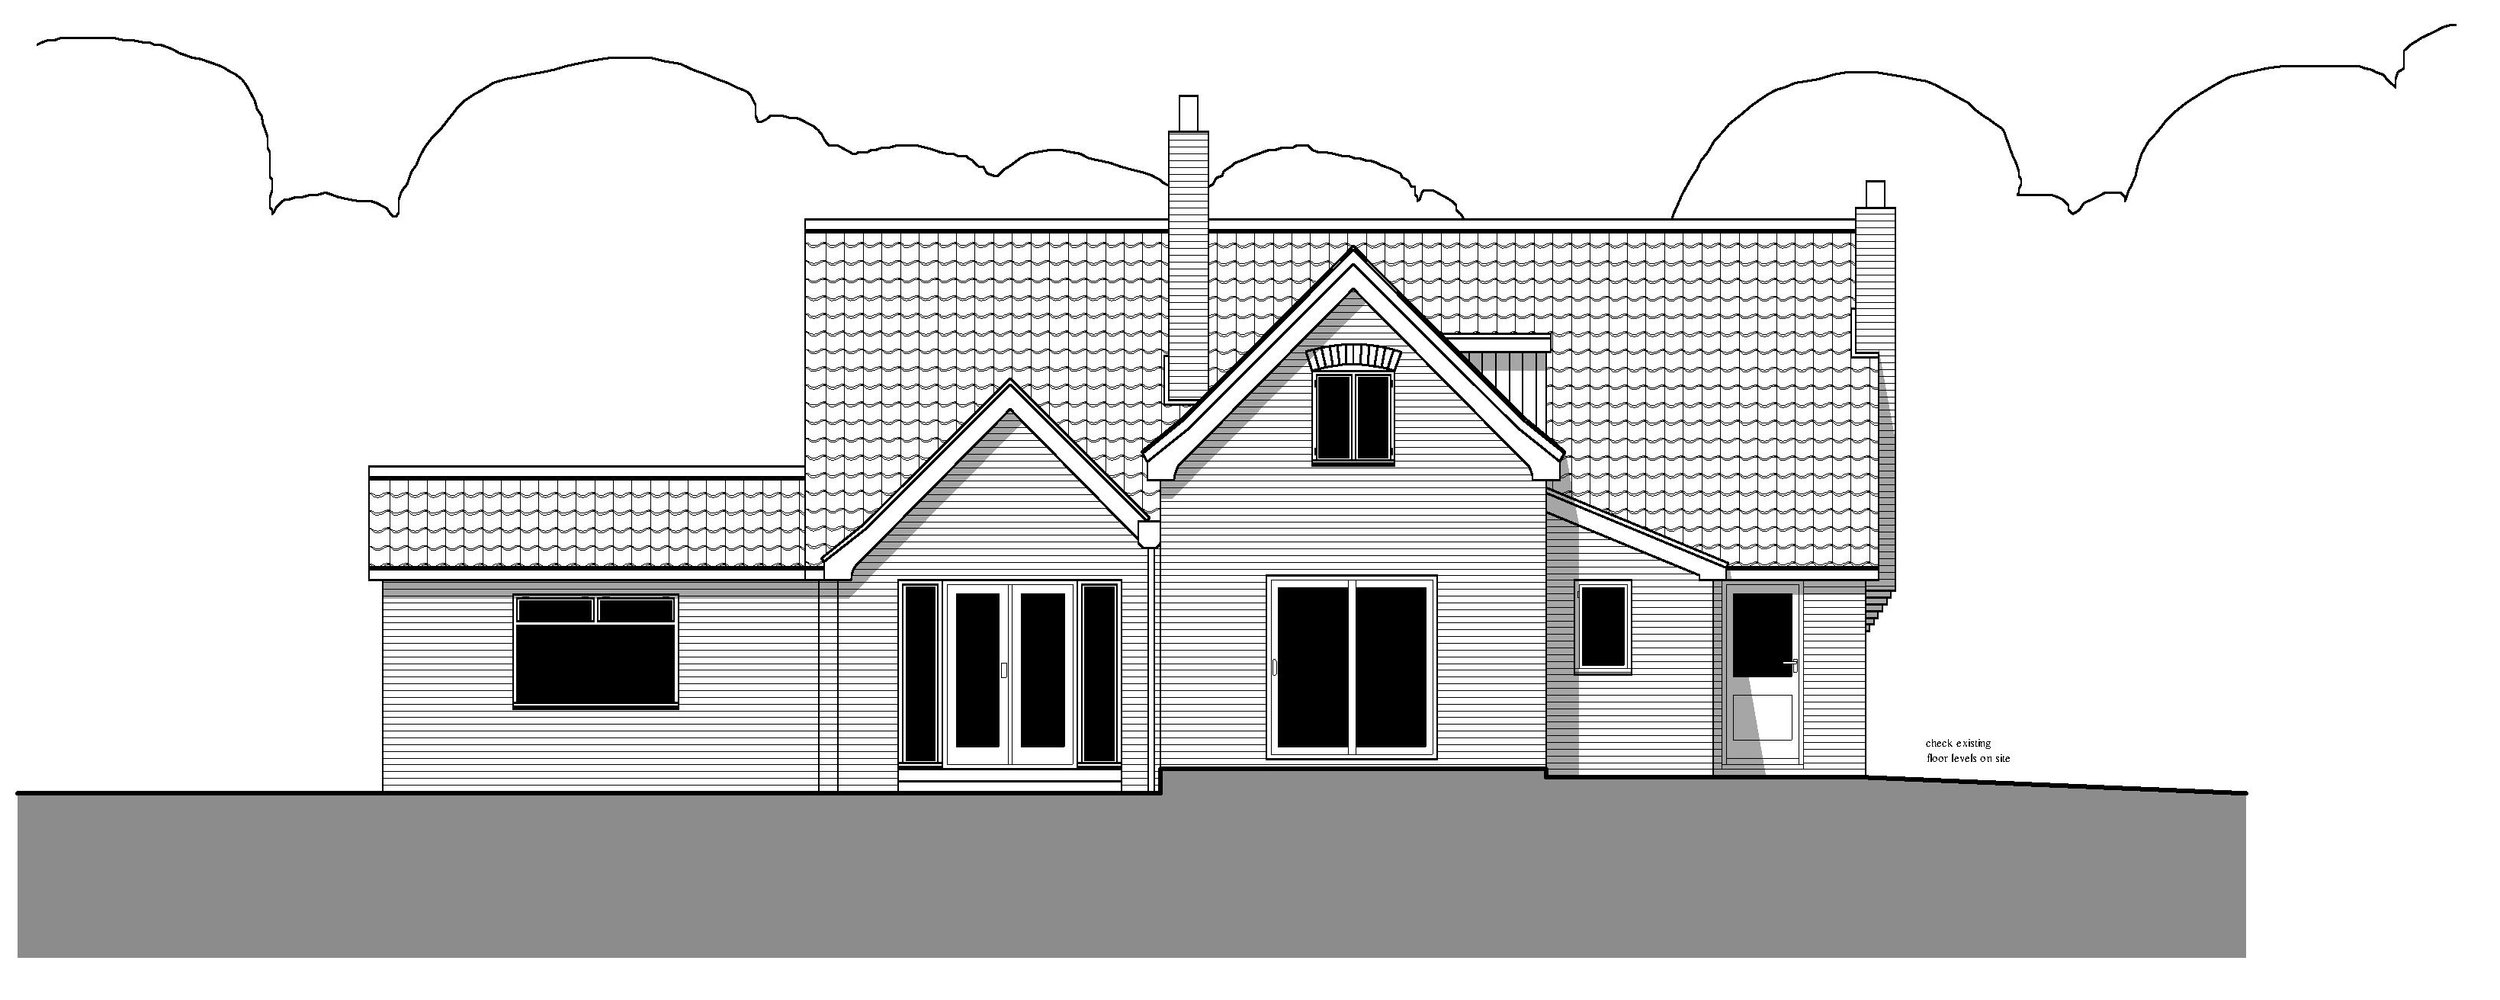 PROPOSED REAR EXTENSION